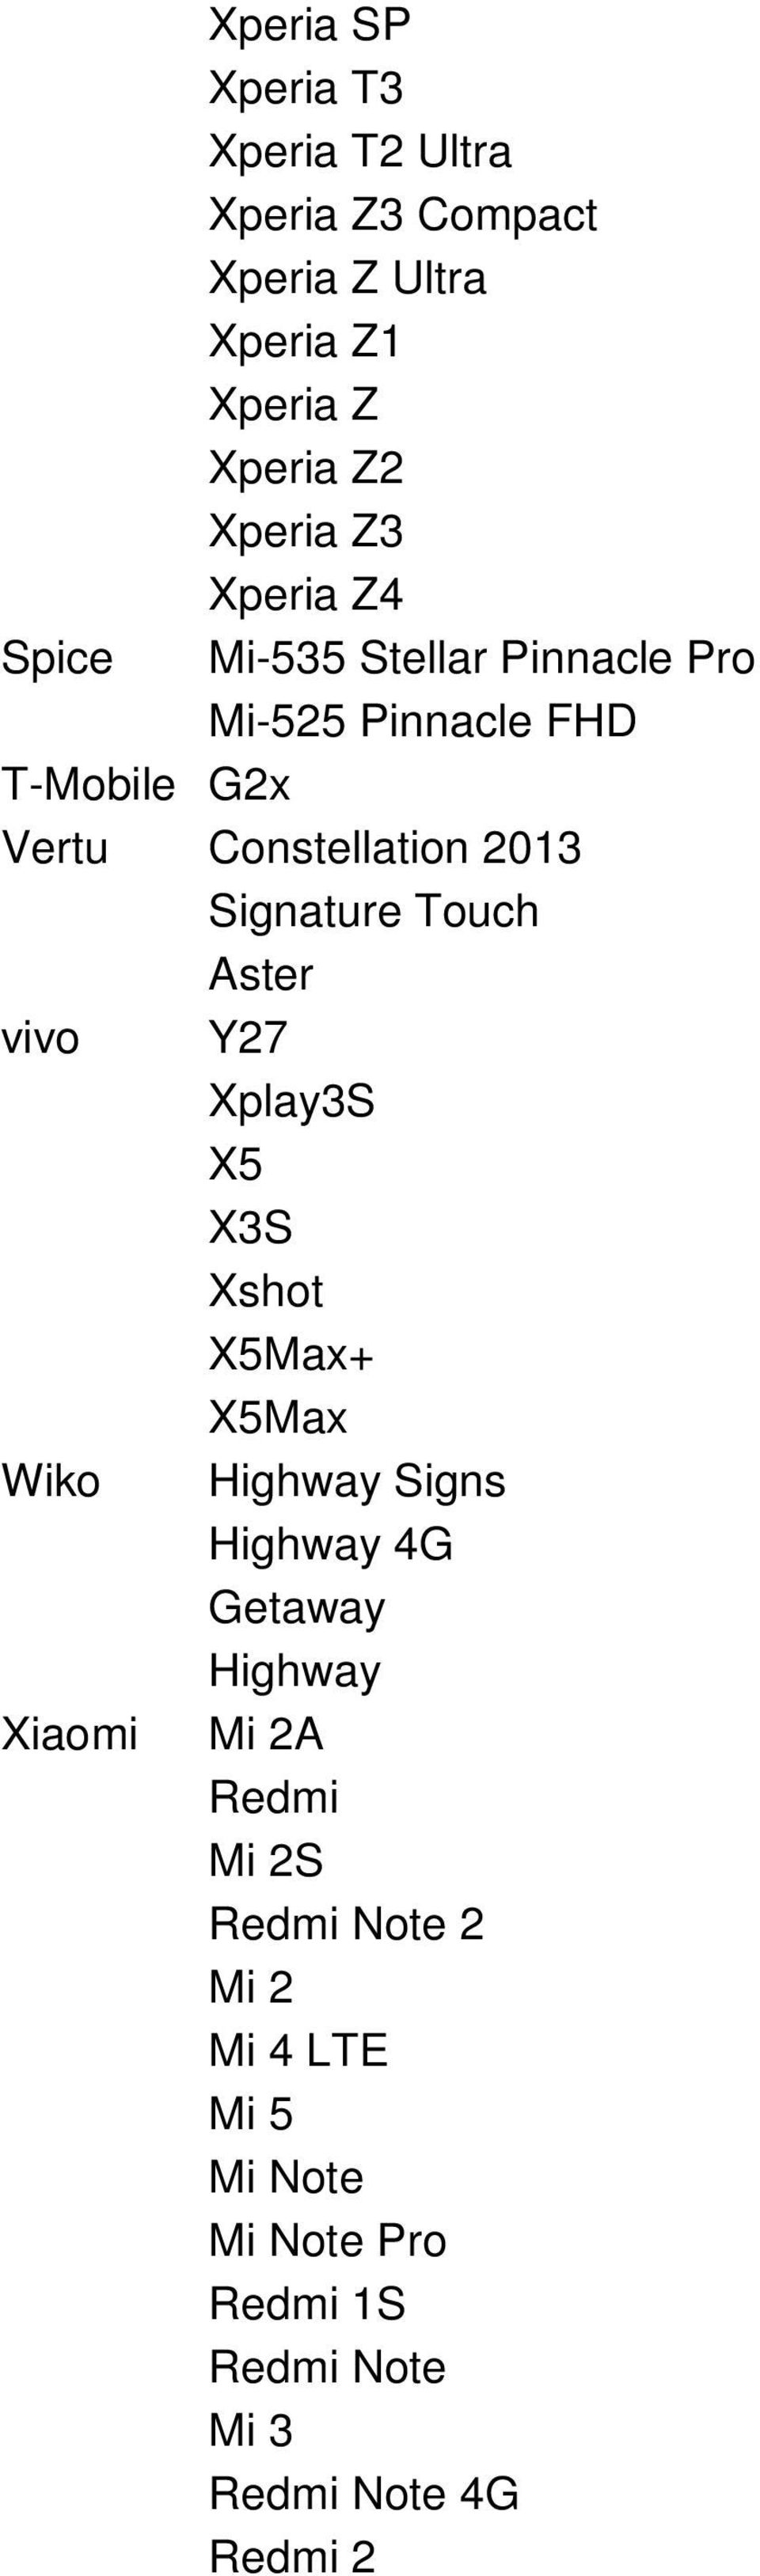 Signature Touch Aster vivo Y27 Xplay3S X5 X3S Xshot X5Max+ X5Max Wiko Highway Signs Highway 4G Getaway Highway